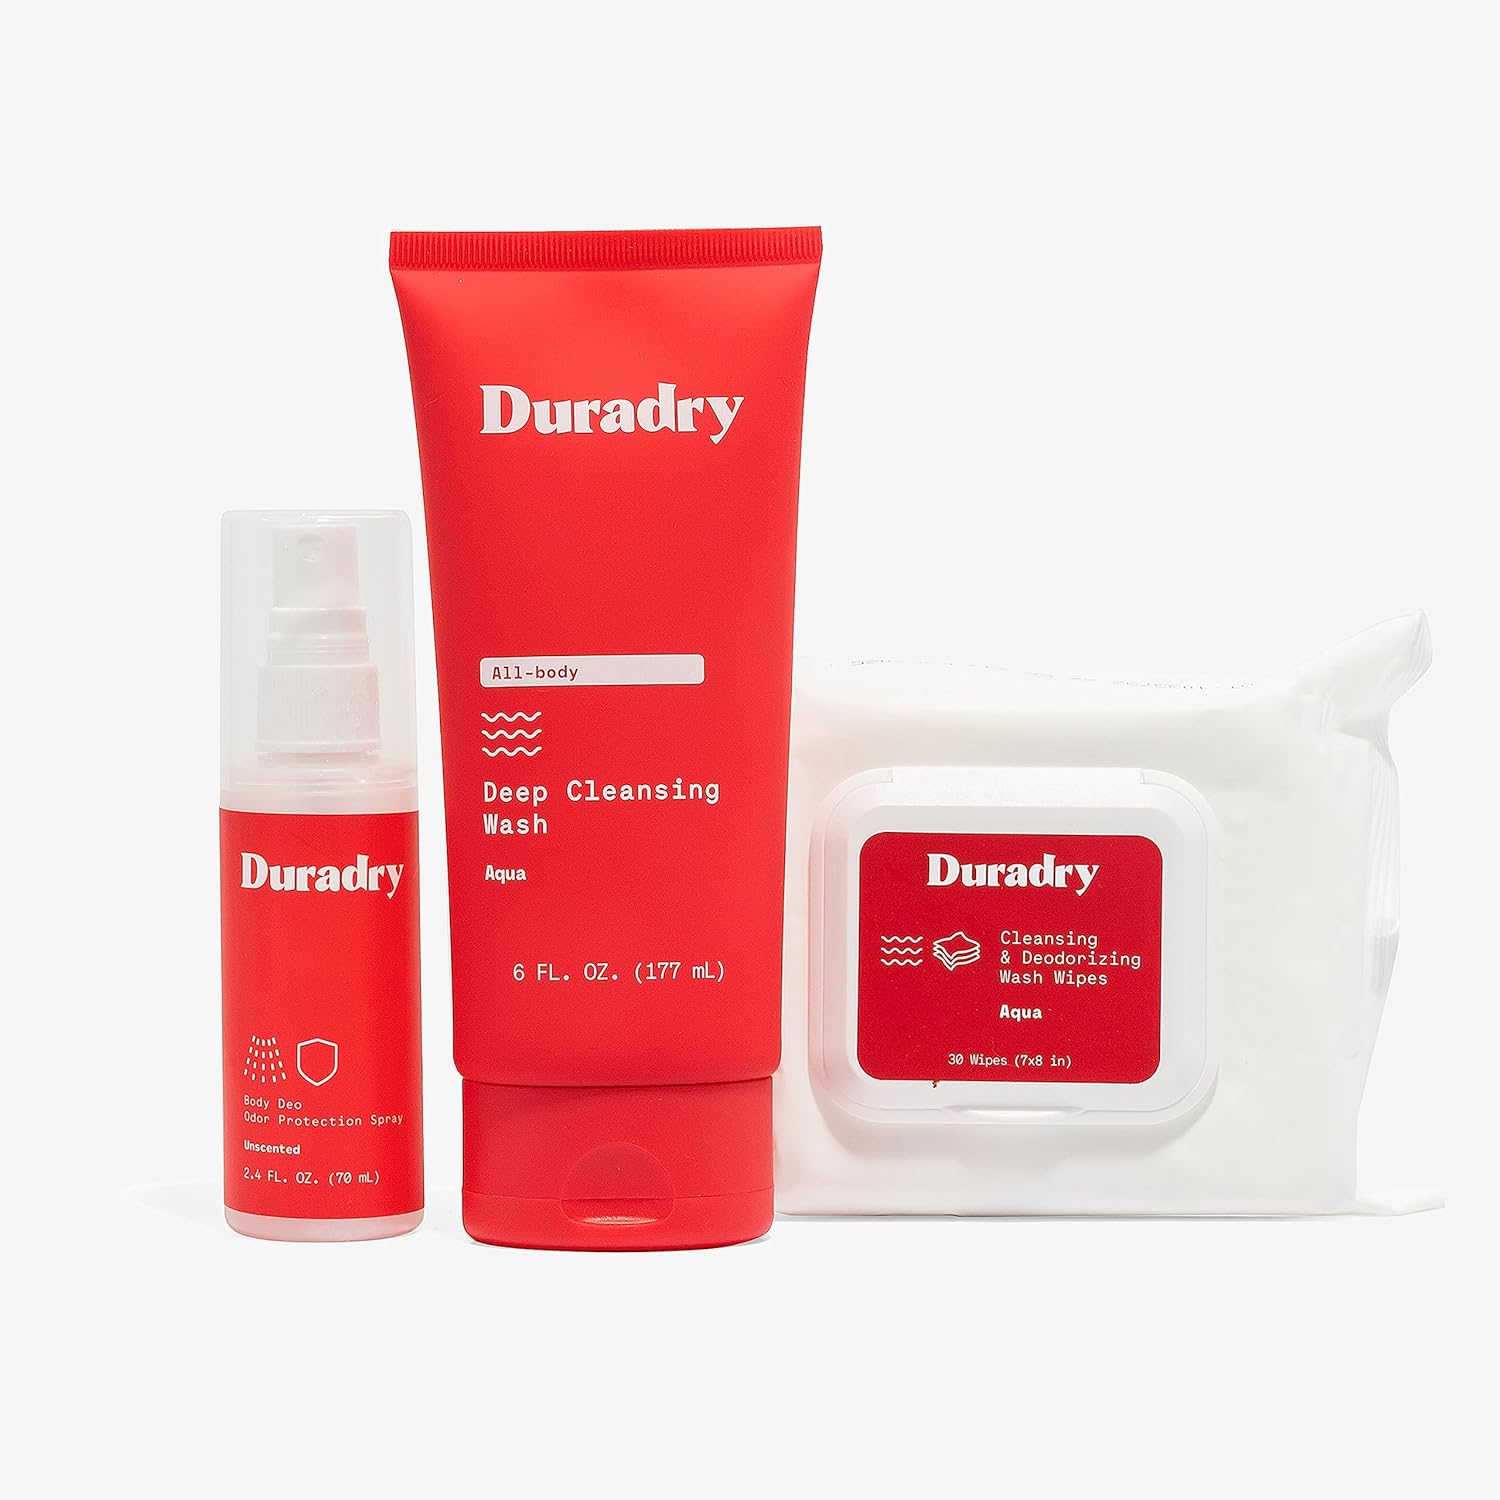 Duradry Fresh Body System - Deep Cleansing, Deodorizing, Controls Odor, Infused with Vitamins and Minerals, Dermatologist Recommended - Body Wash, Wash Wipes, Body Deodorant Spray